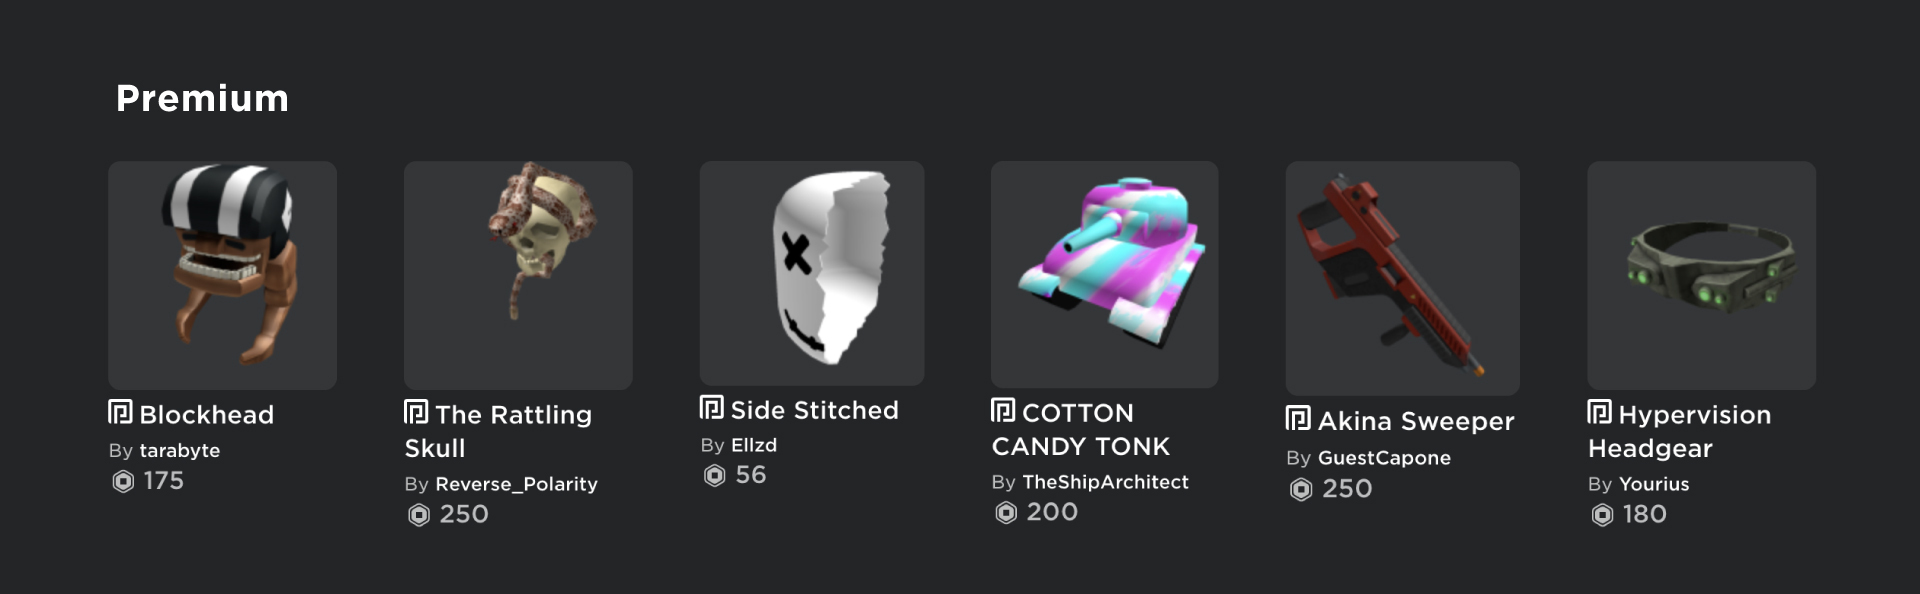 Roblox Free Items Game